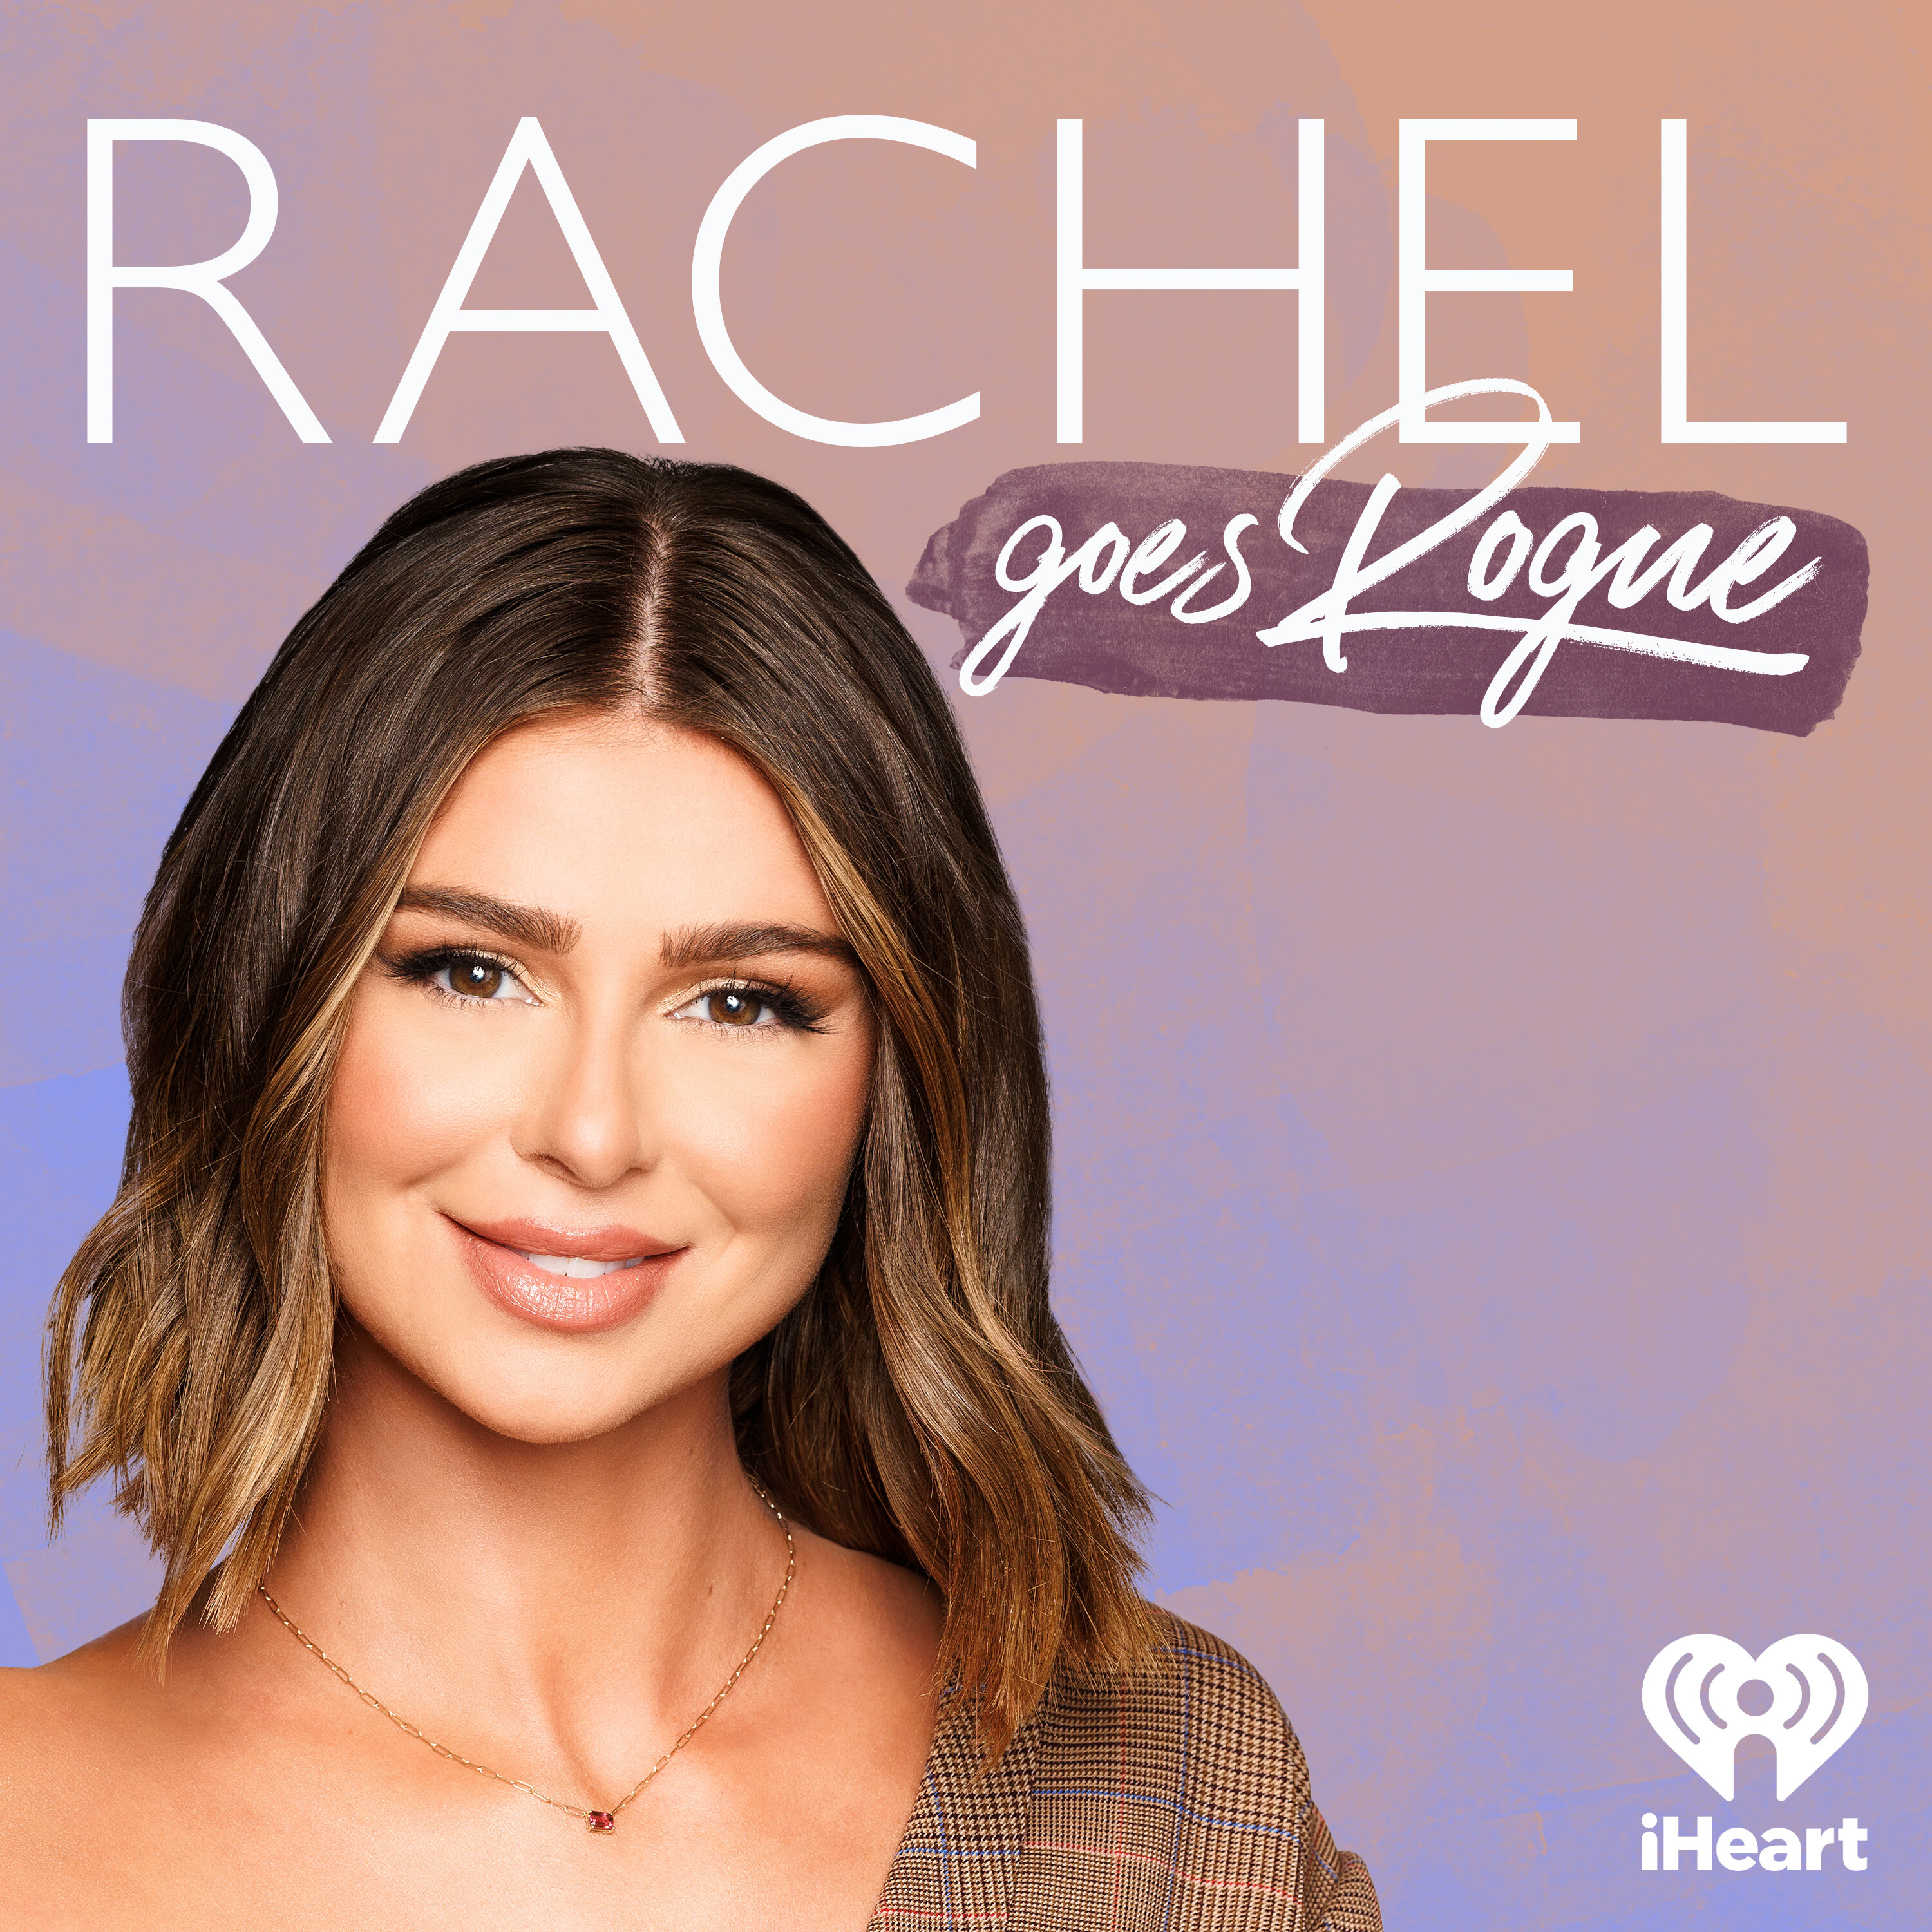 Rachel Goes Rogue by iHeartPodcasts